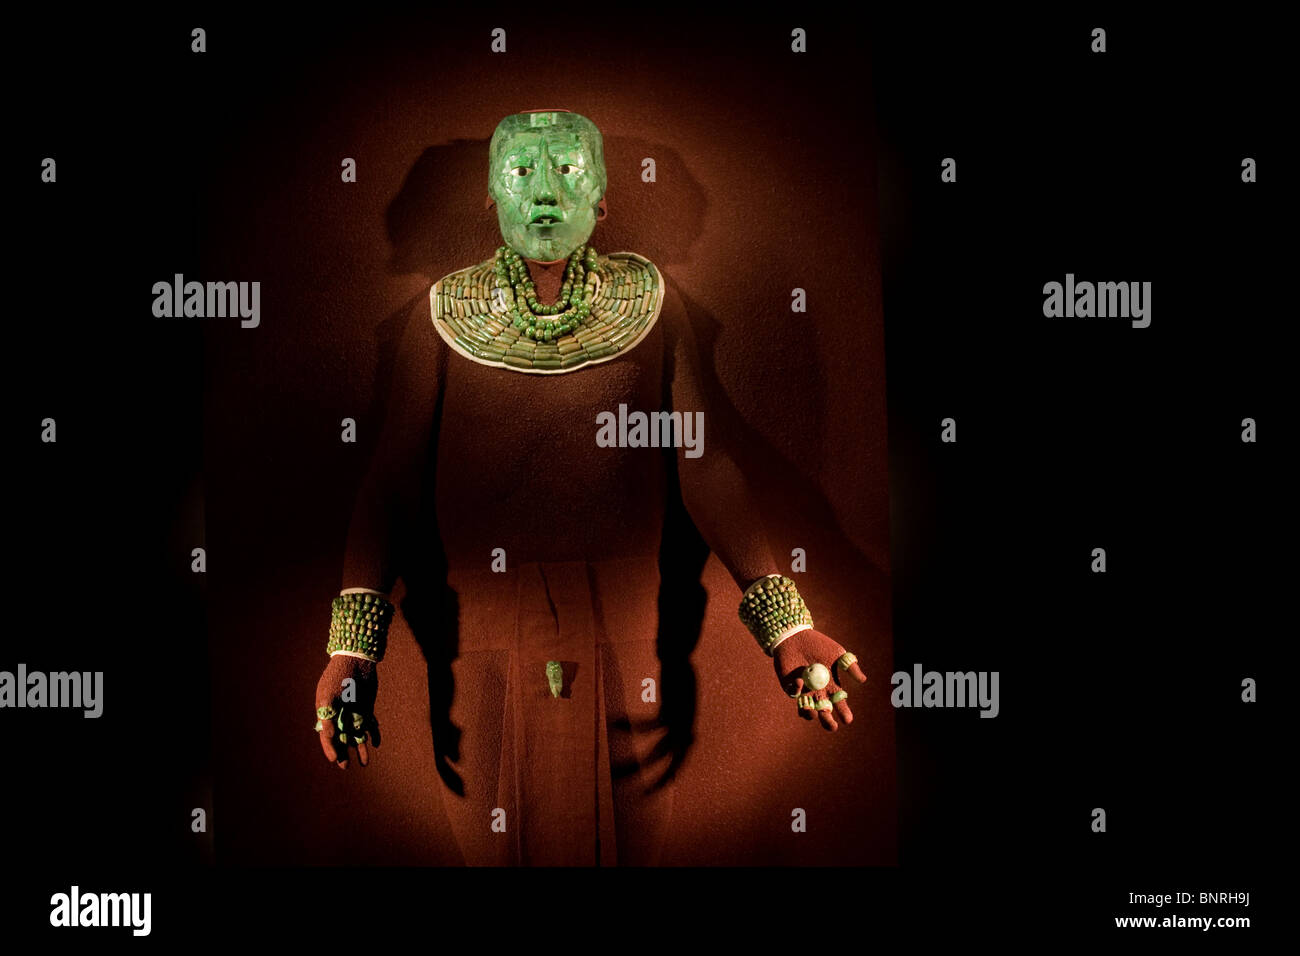 The jade mask and the jewelry found in the tomb of Mayan king Pakal, National Museum of Anthropology and History, Mexico City. Stock Photo